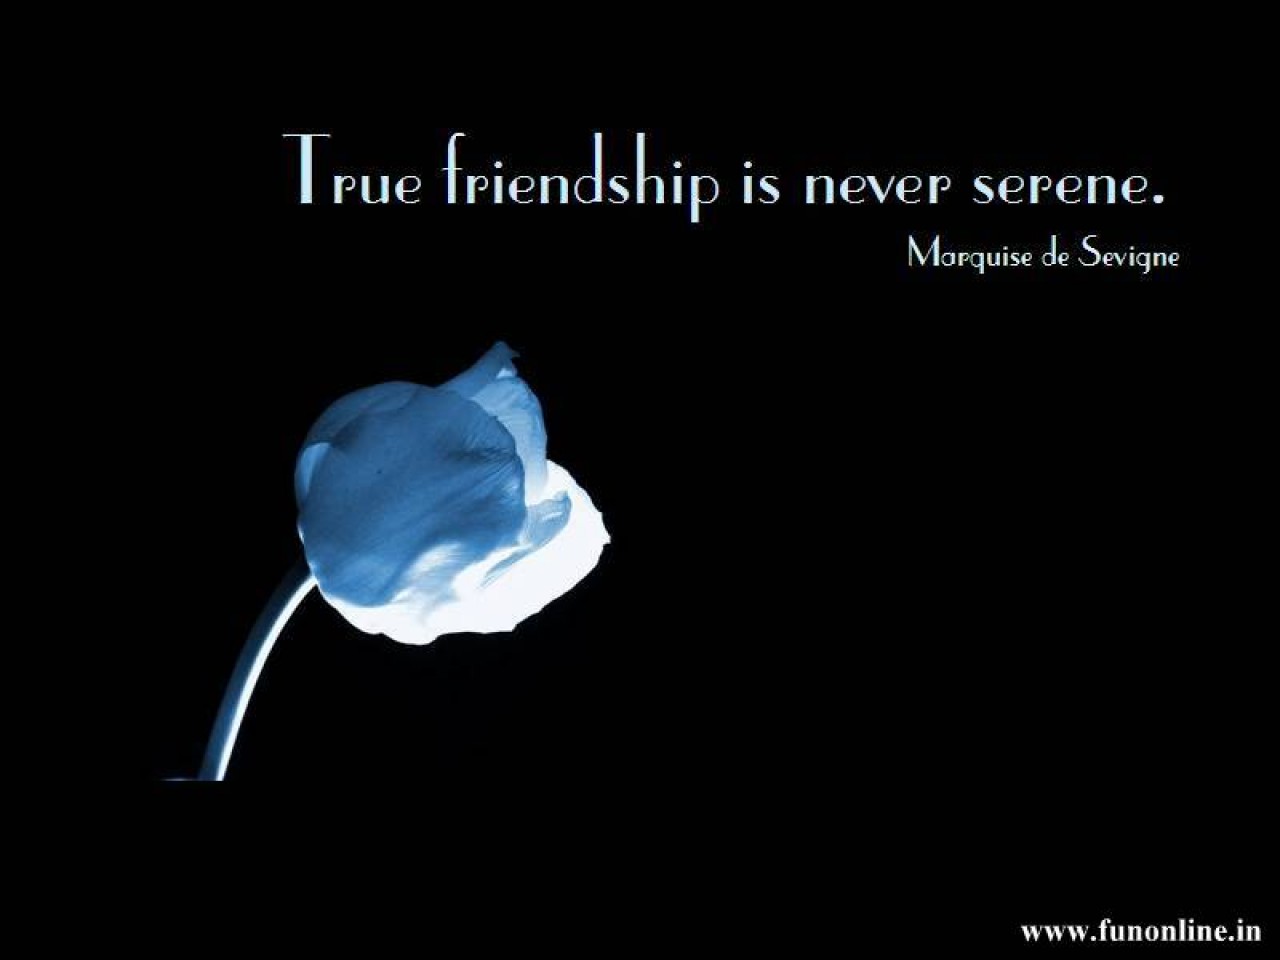 Free download Friendship Wallpapers Lovely Friendship Wallpapers ...